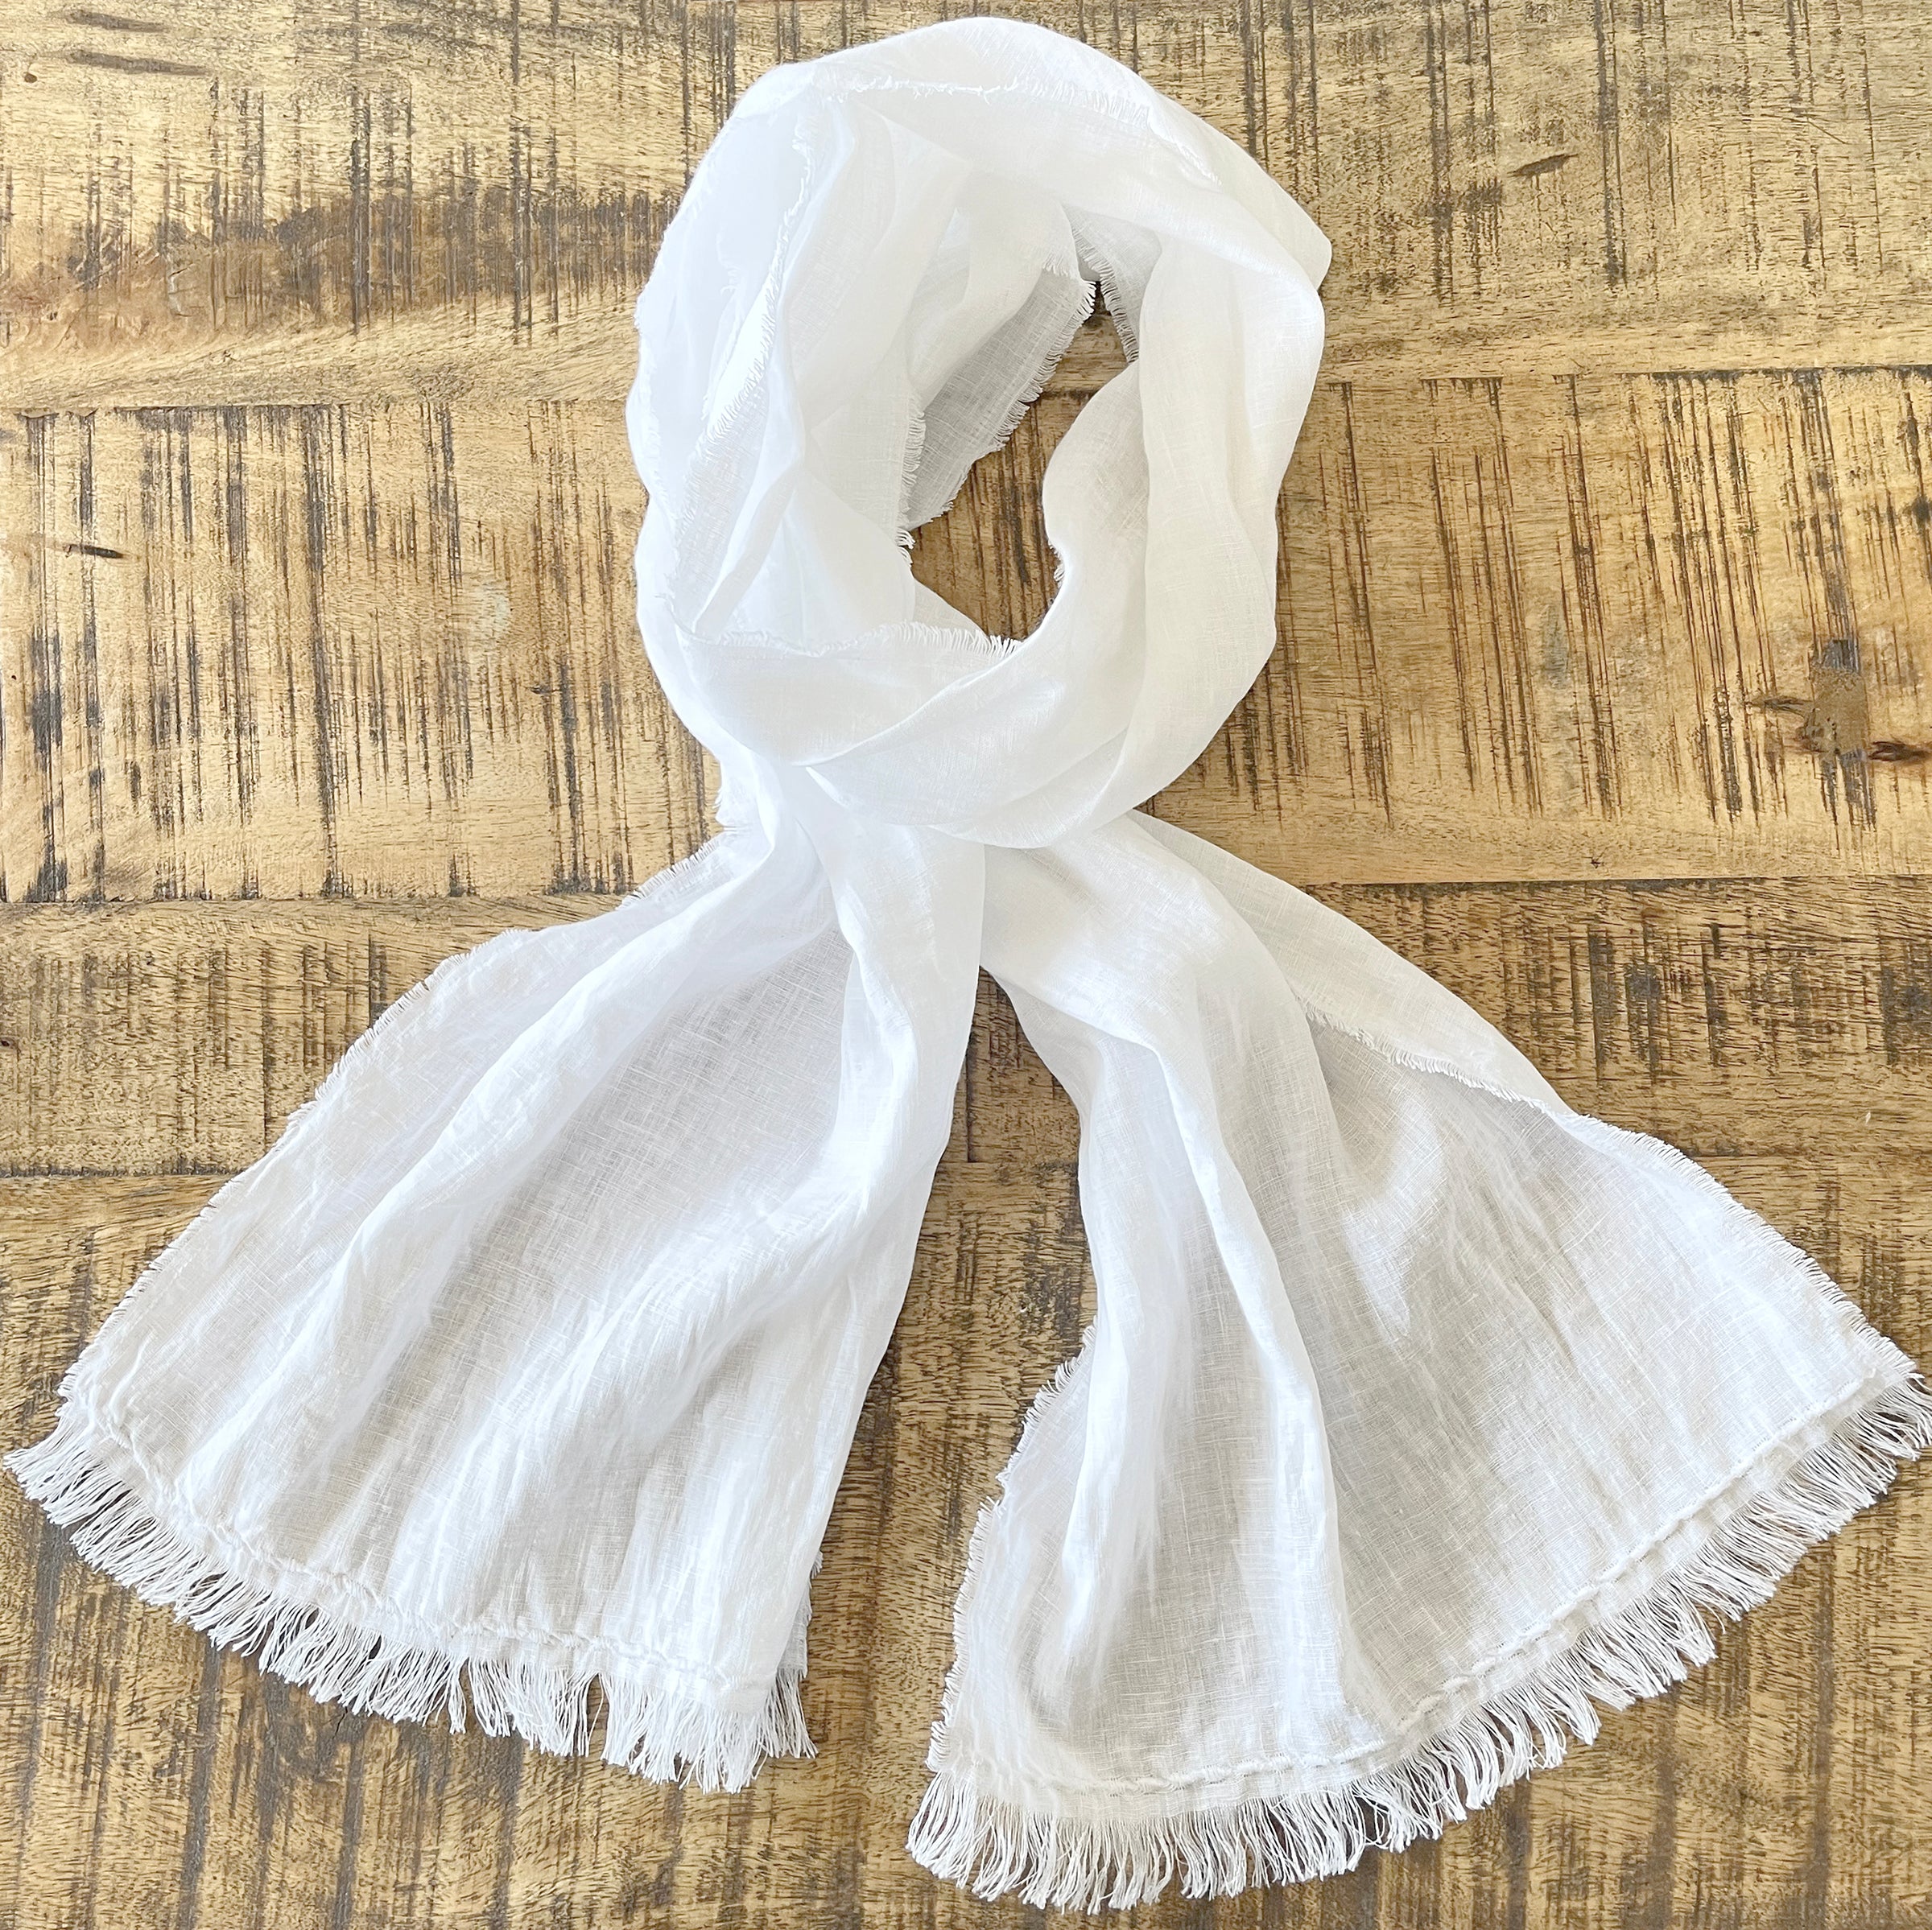 Fringed White Linen Scarf with Embroidery Trim, Unisex, Two Sizes 